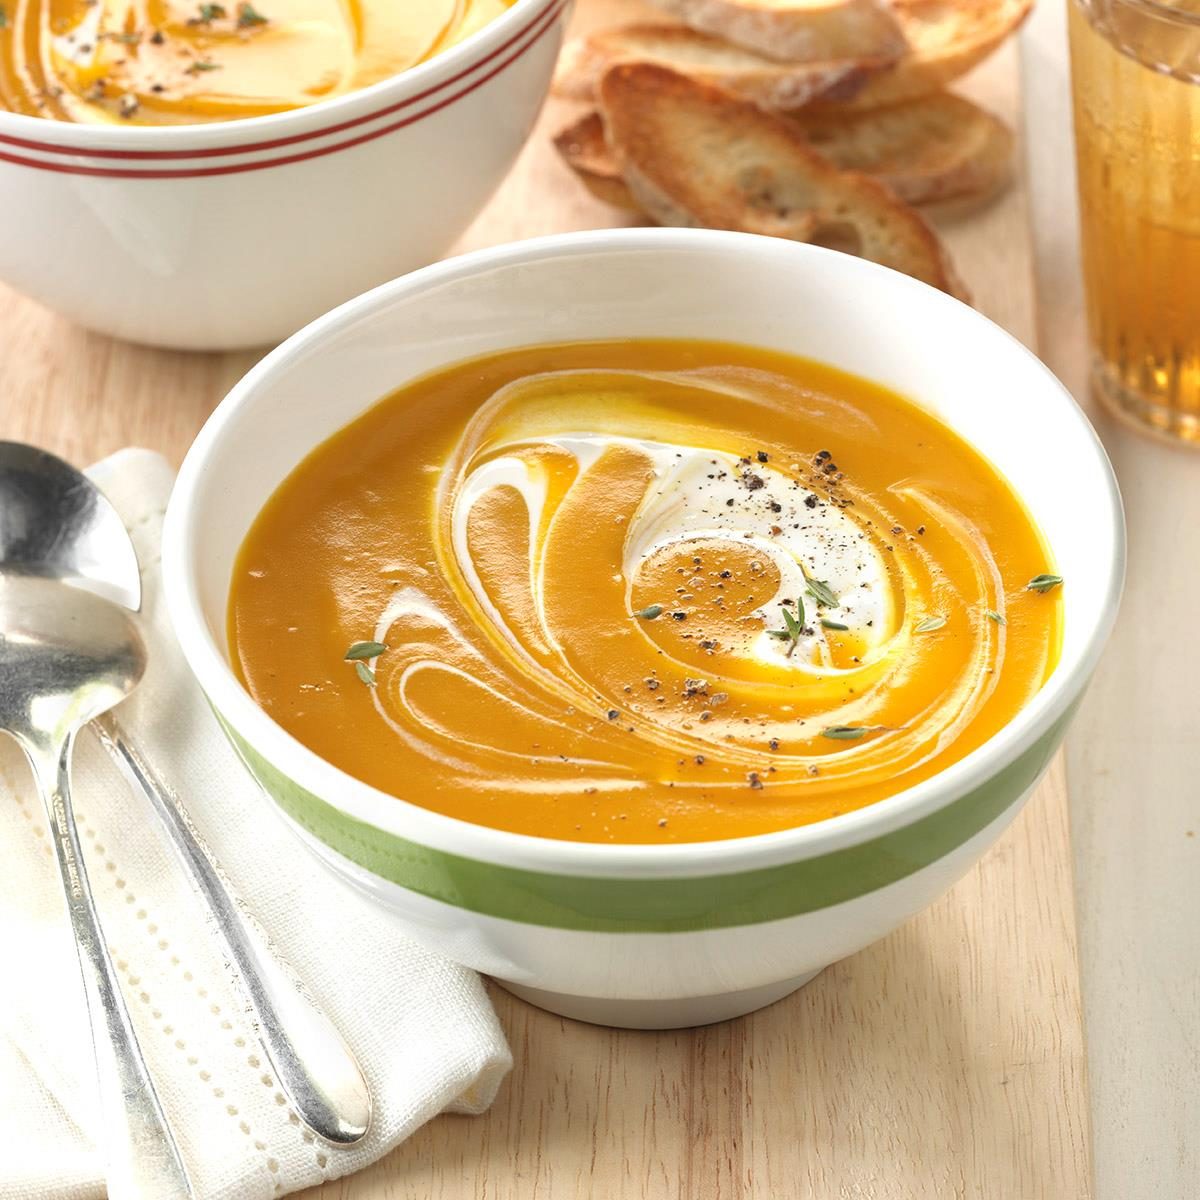 Slow-Cooker Butternut Squash Soup Recipe: How to Make It